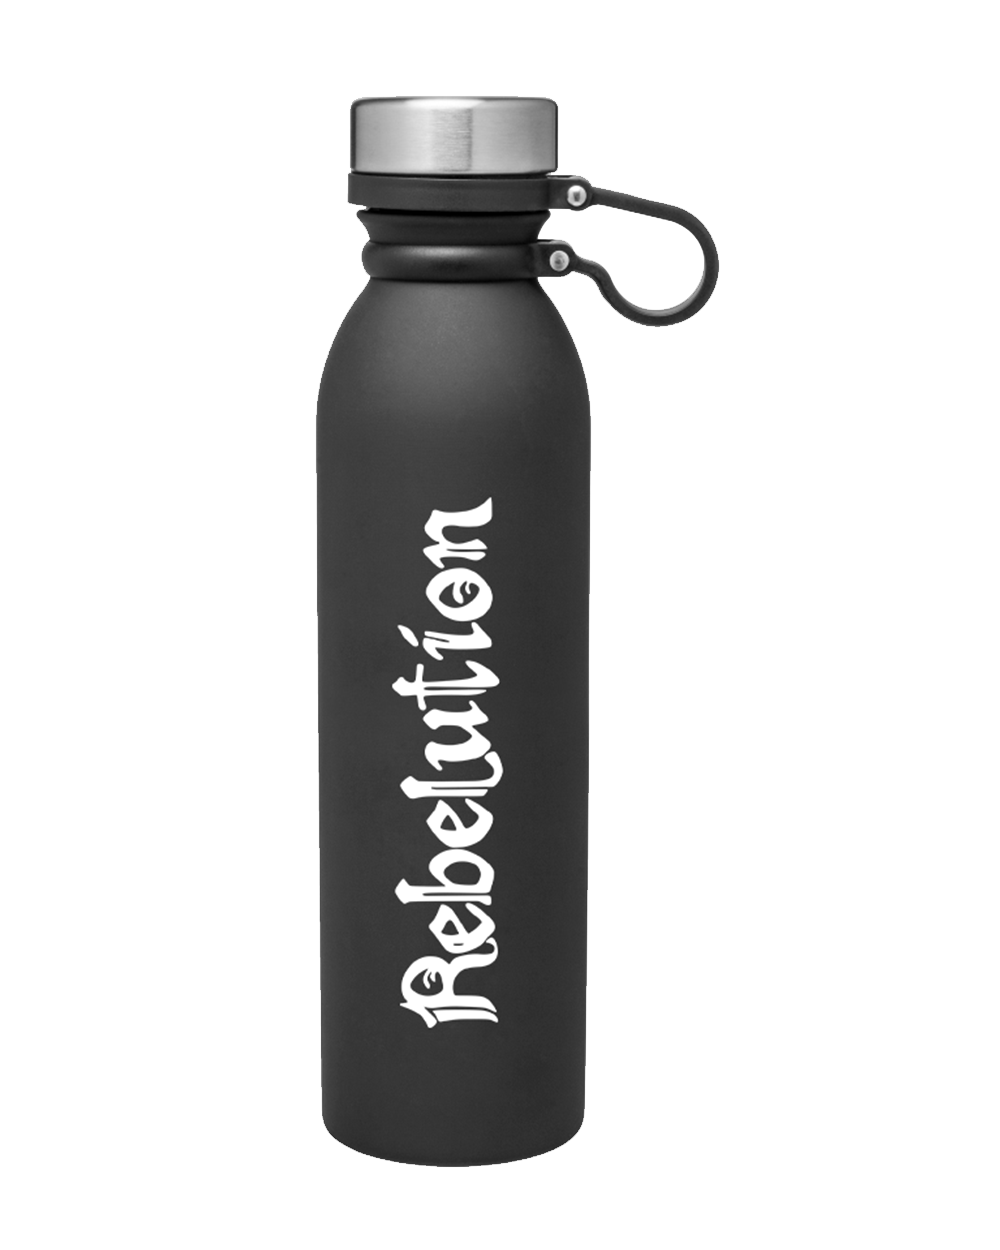 25oz Stainless Steel Thermal Bottle